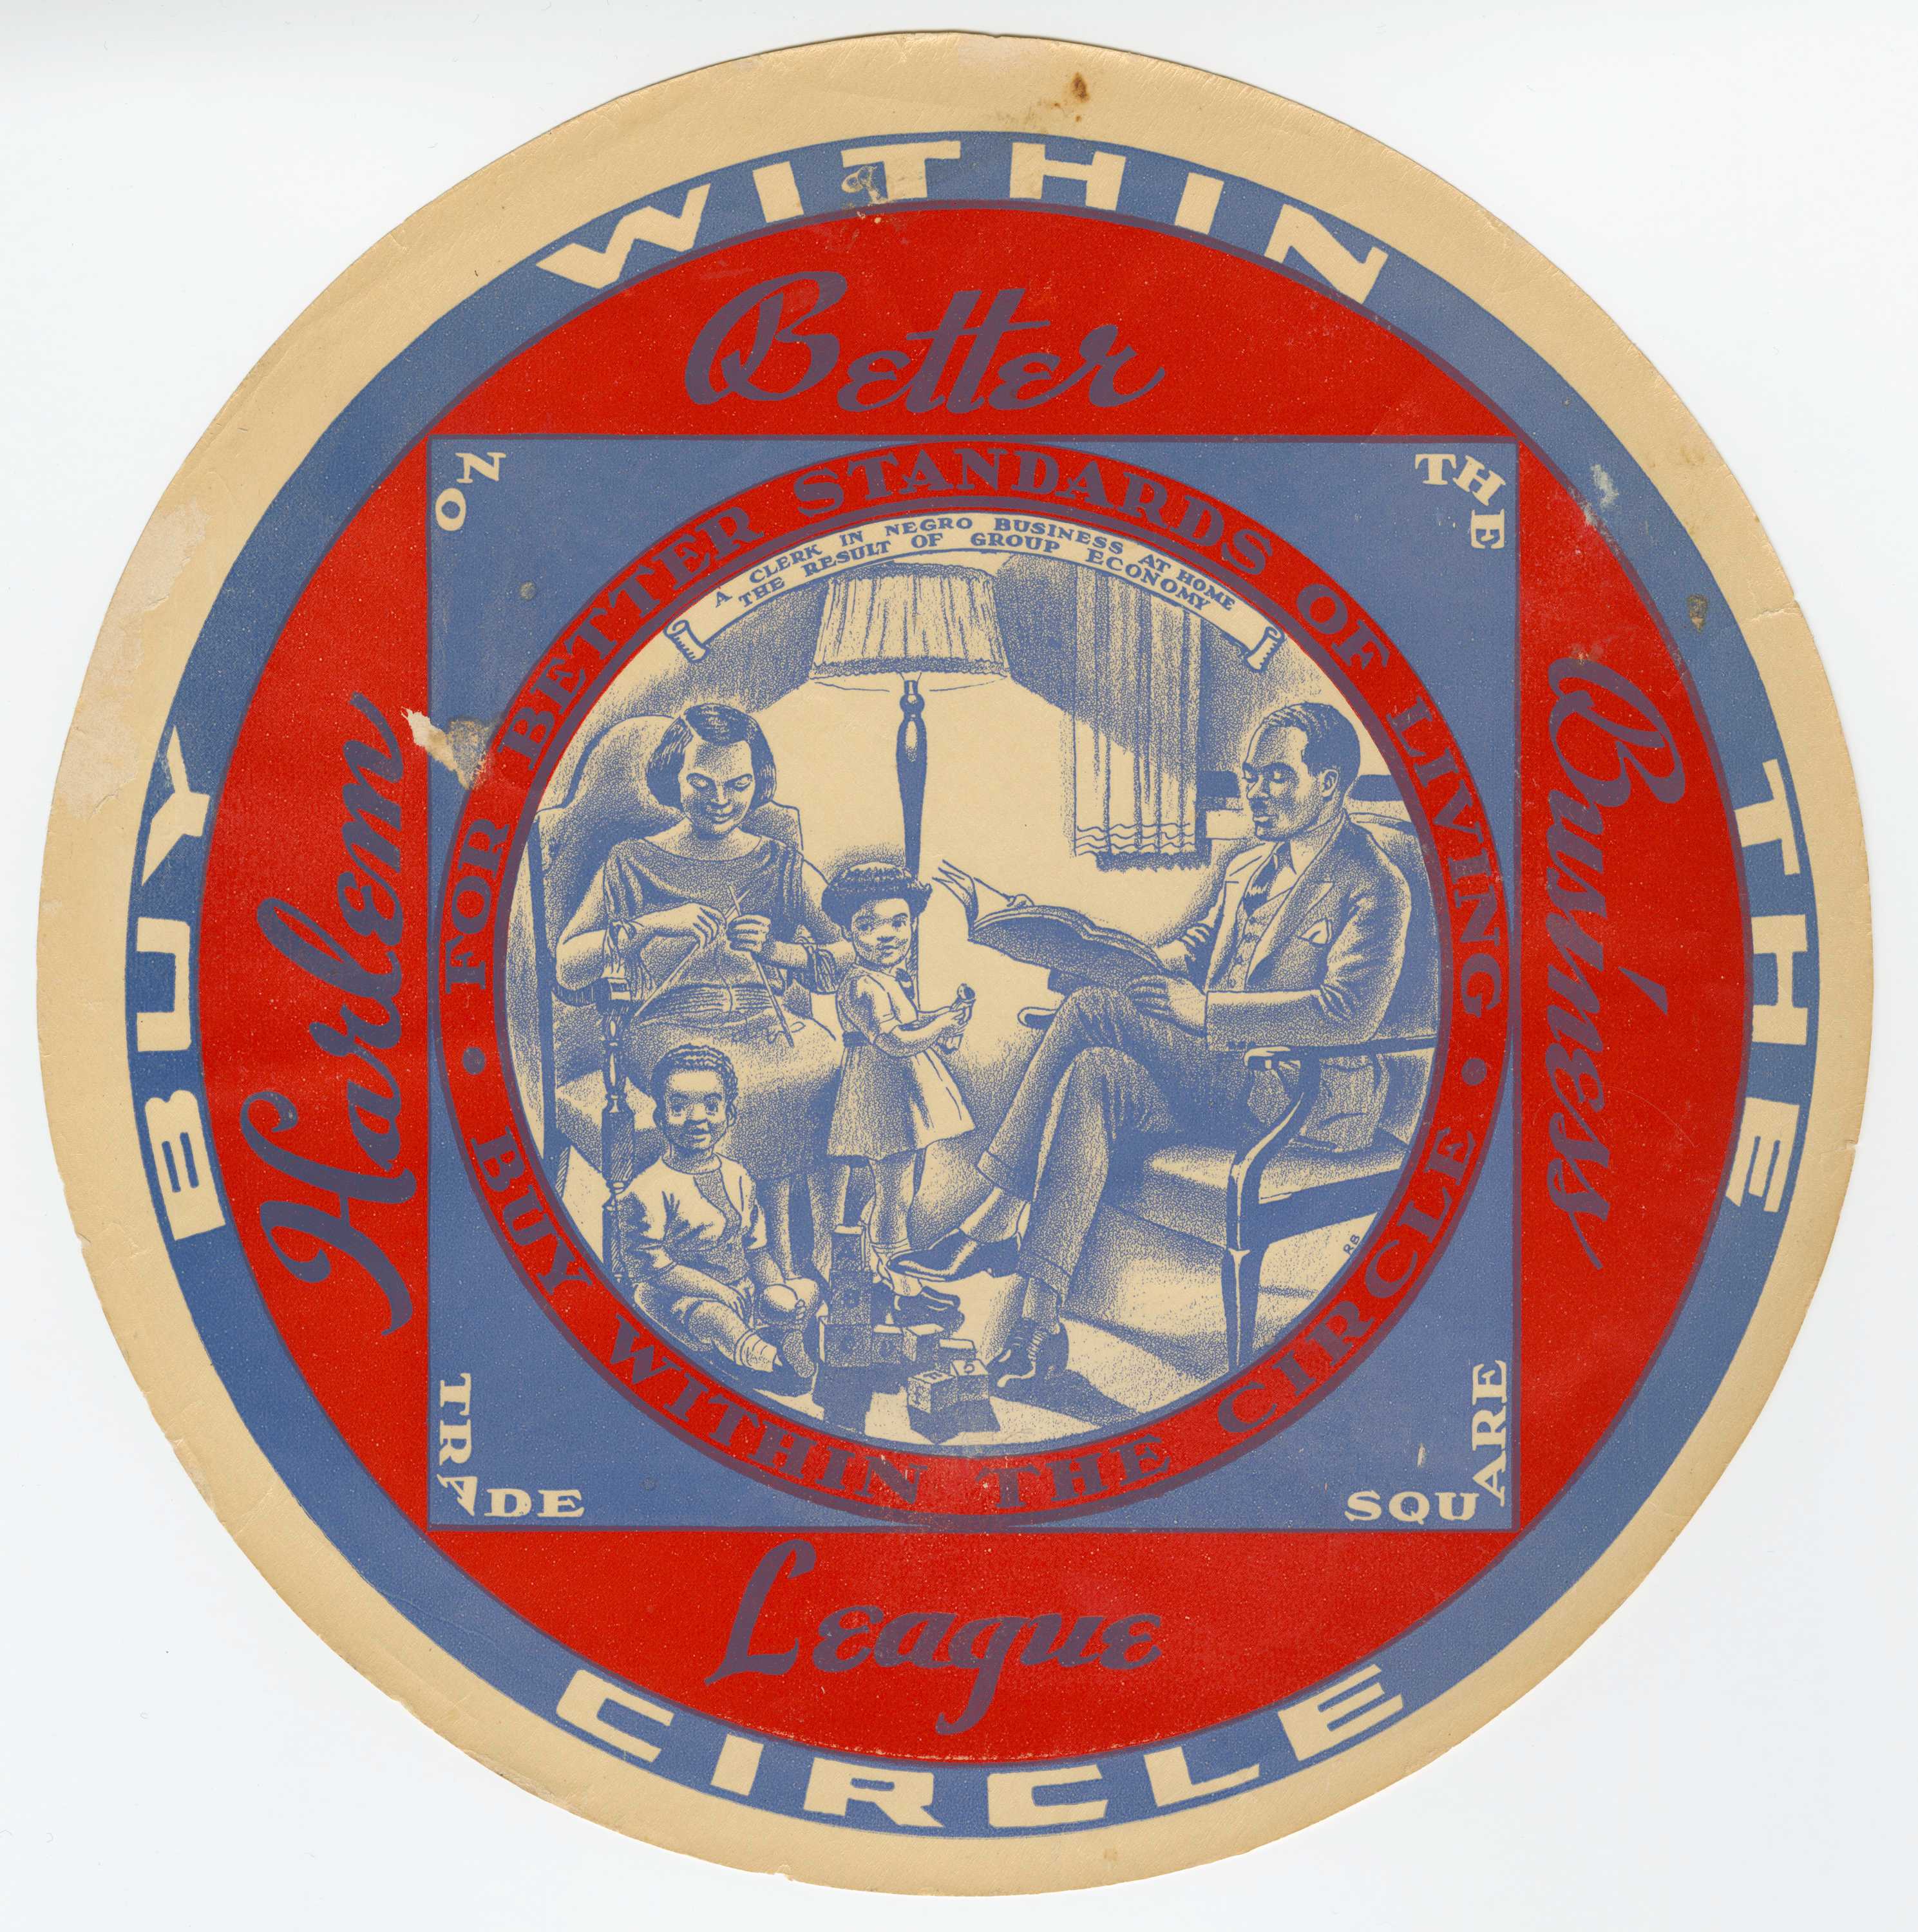 Round red, blue and off-white poster enclosing a smaller circular vignette of an African American family with the caption "A Clerk in Negro Business at Home. The Result of Group of Economy".